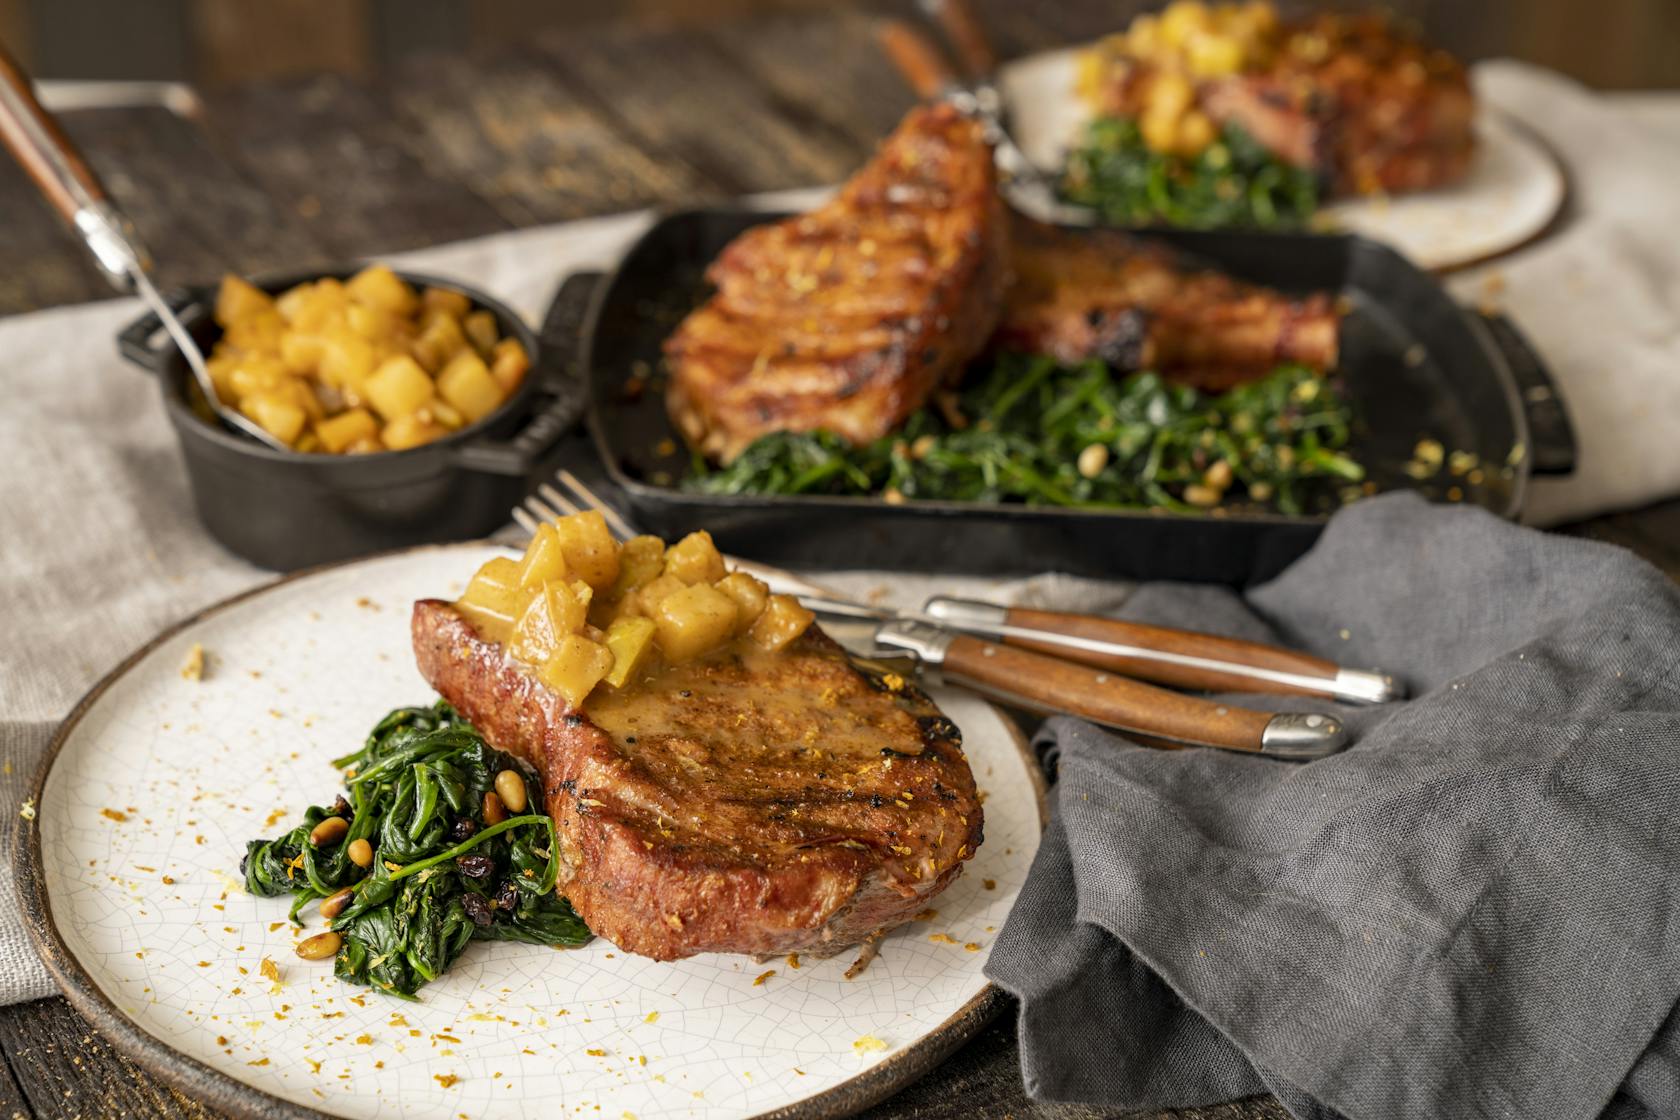 Cider Brined Pork Chops with Apple Pear Compote